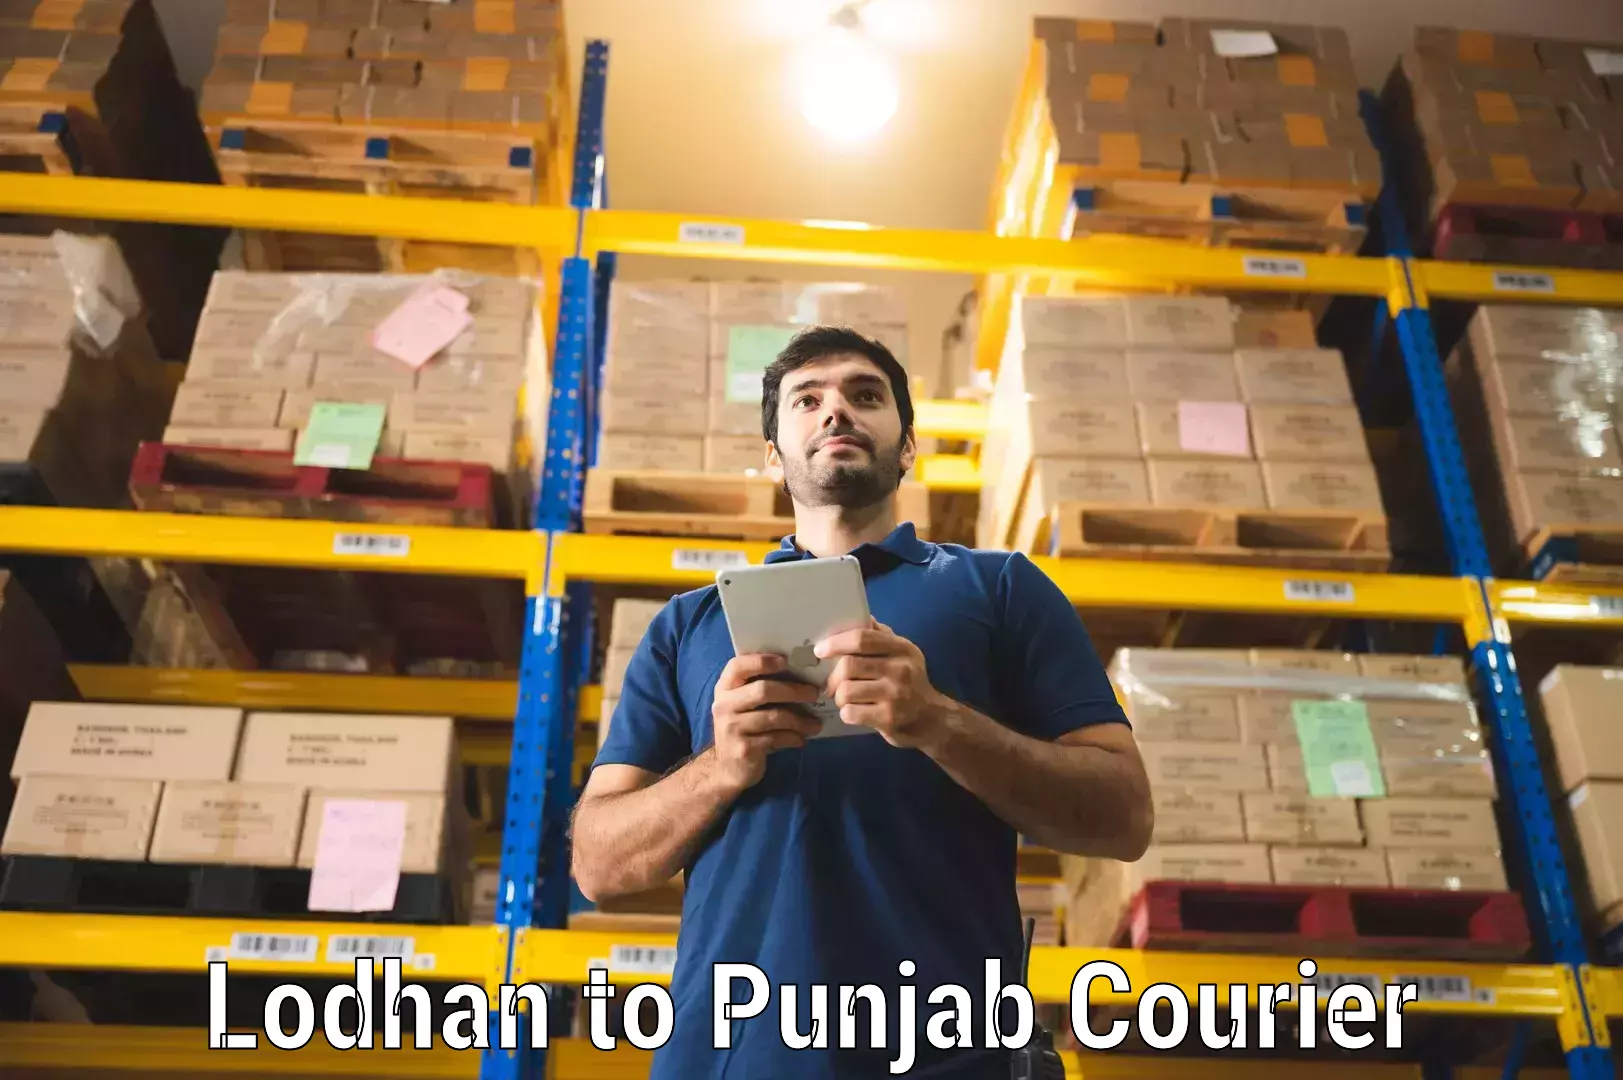 Nationwide delivery network Lodhan to Punjab